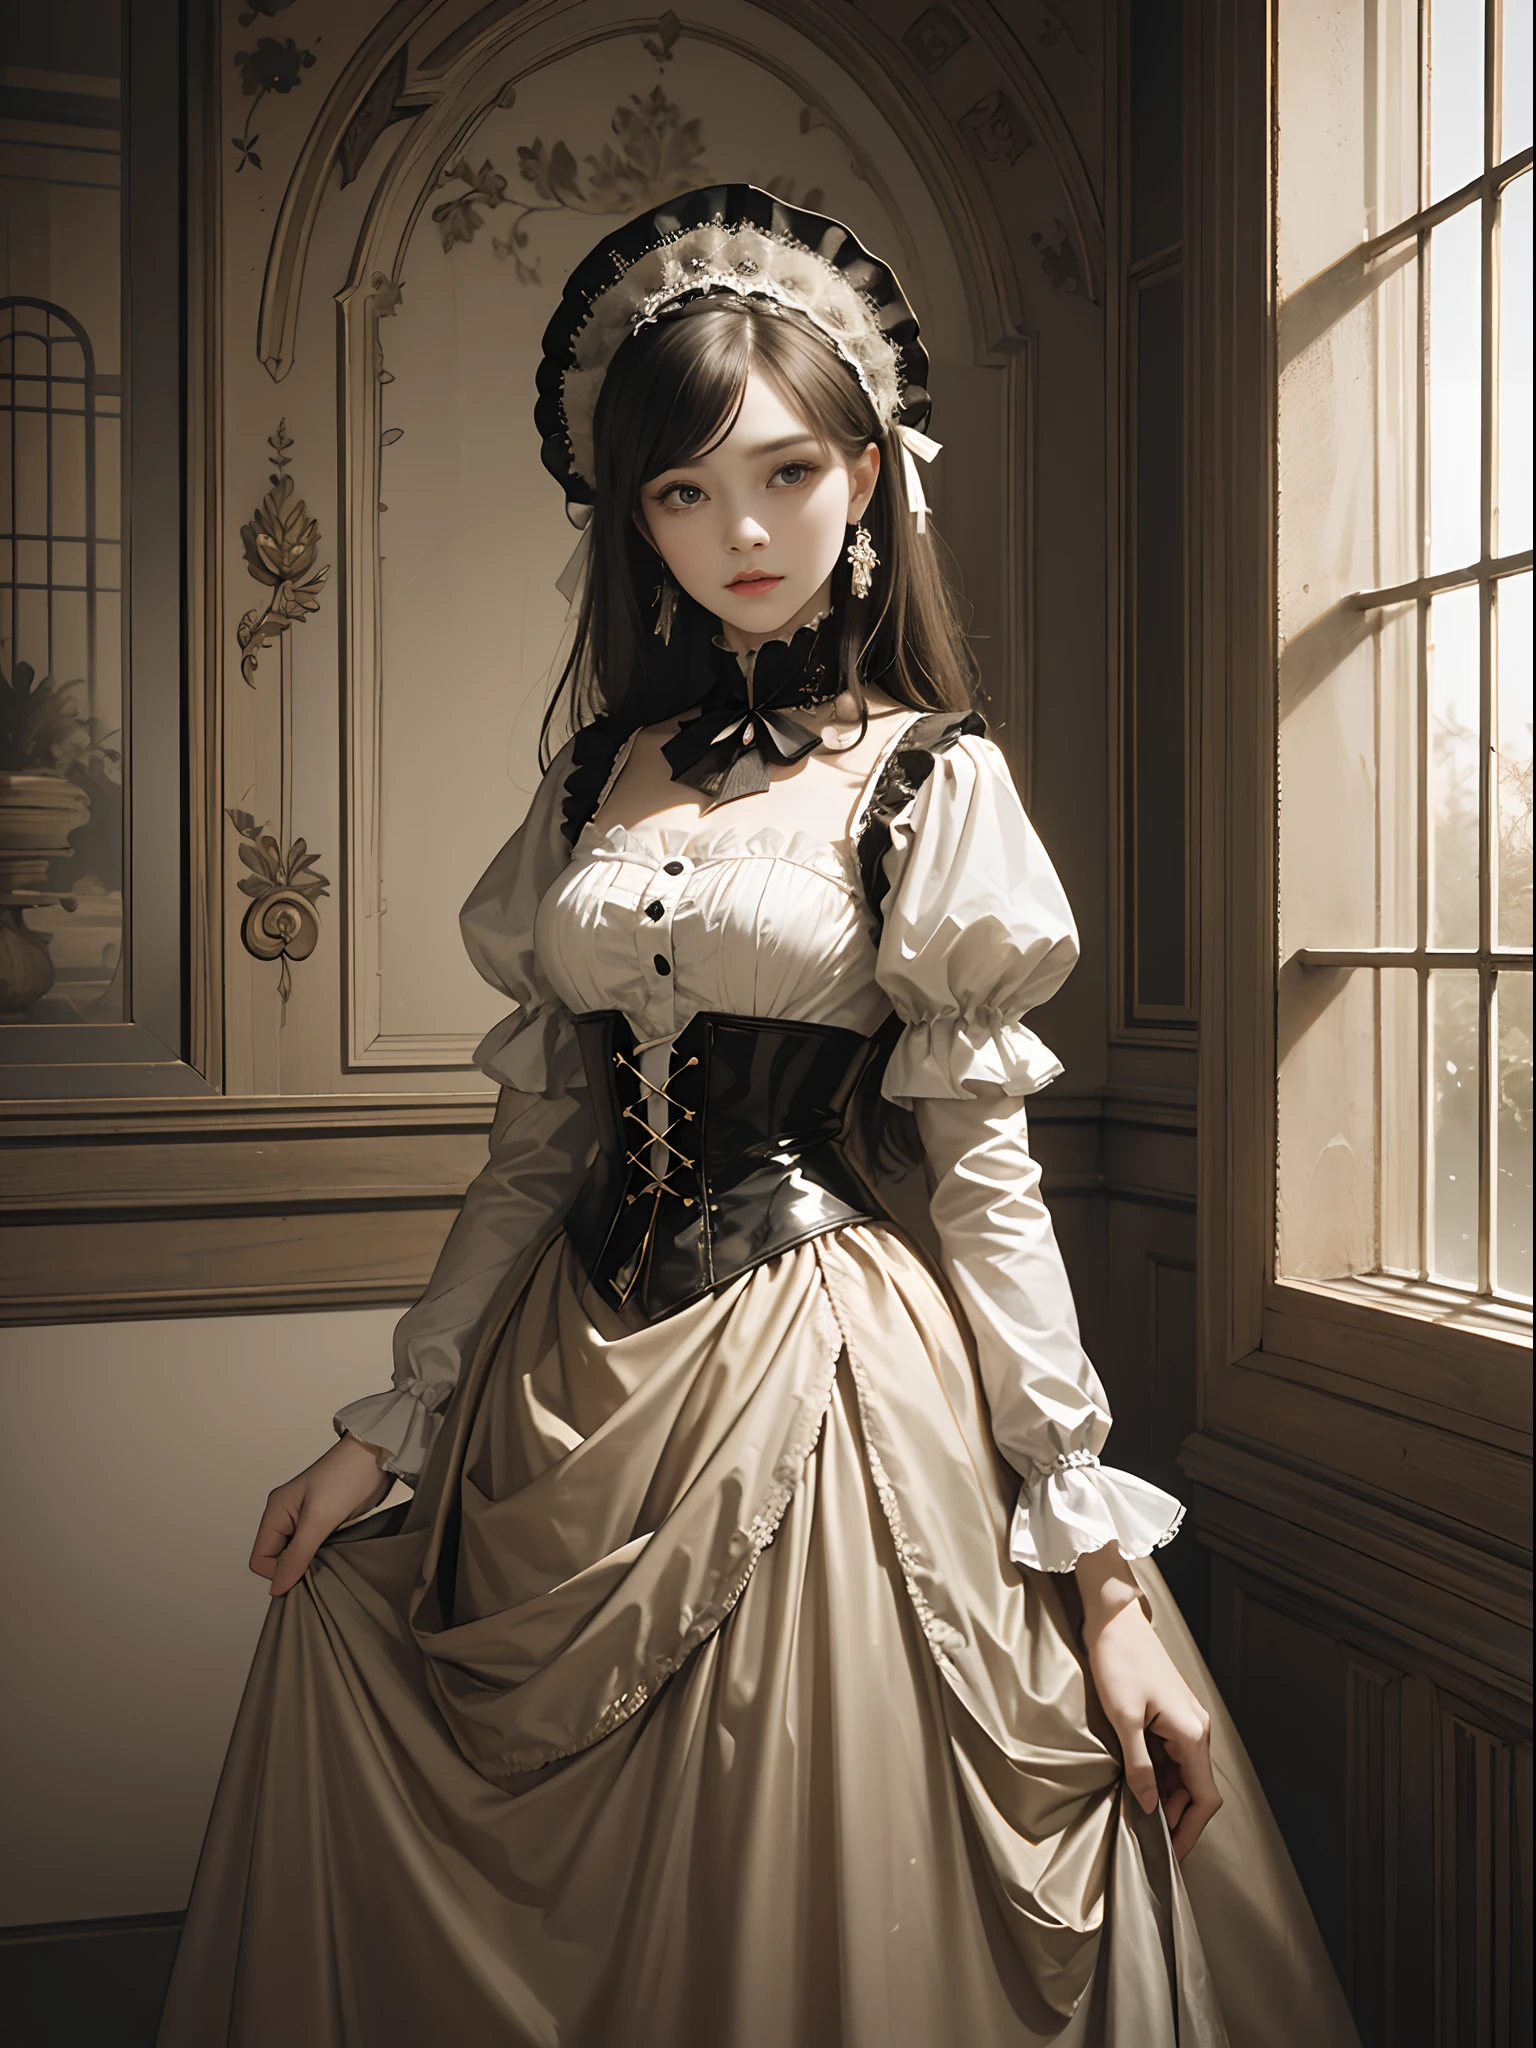 (Pure Color: 0.9), (Color: 1.1), (Masterpiece: 1,2) 30 years old, Best Quality, Masterpiece, High Resolution, Original, Highly Detailed Wallpaper, Beauty, Victorian, Dress, Melancholy, Sepia Color, 30 years old